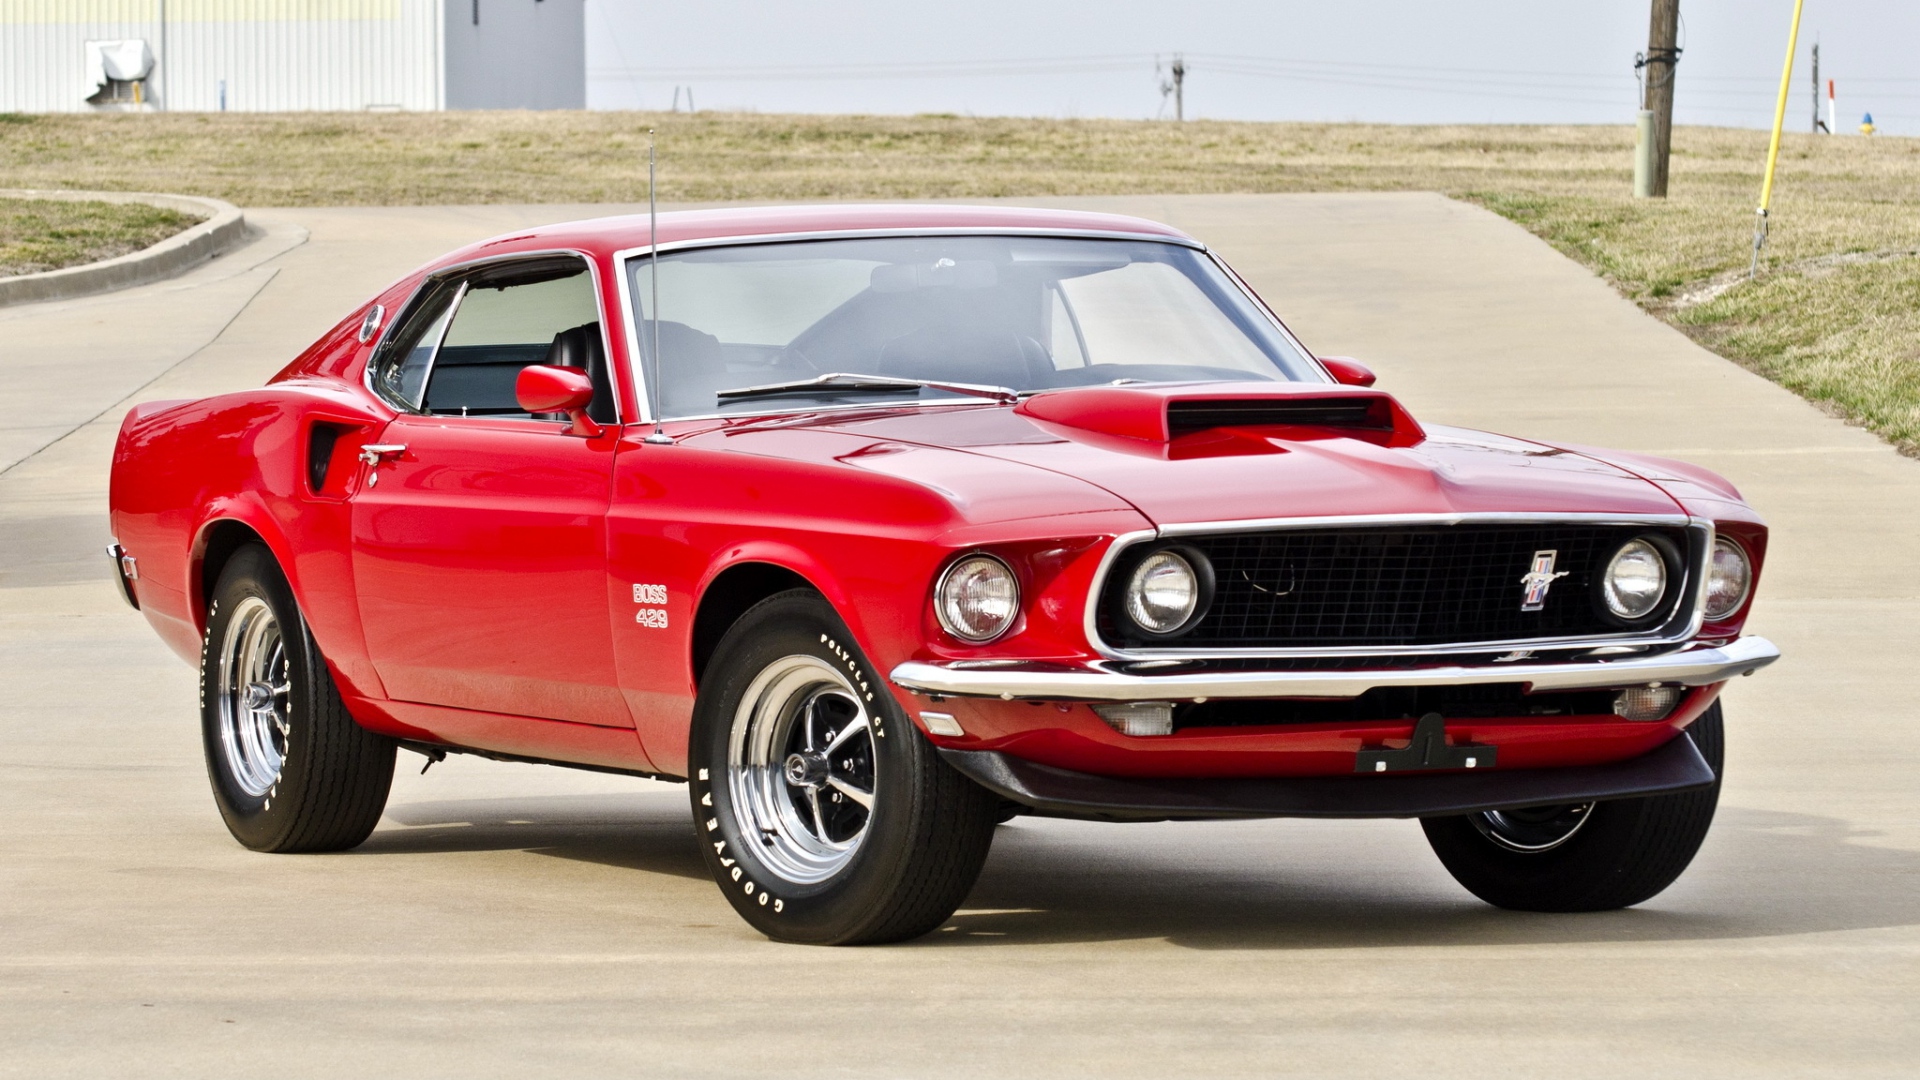 Download Wallpaper 1920x1080 Boss, Muscle car, Ford, 1969, Red ...